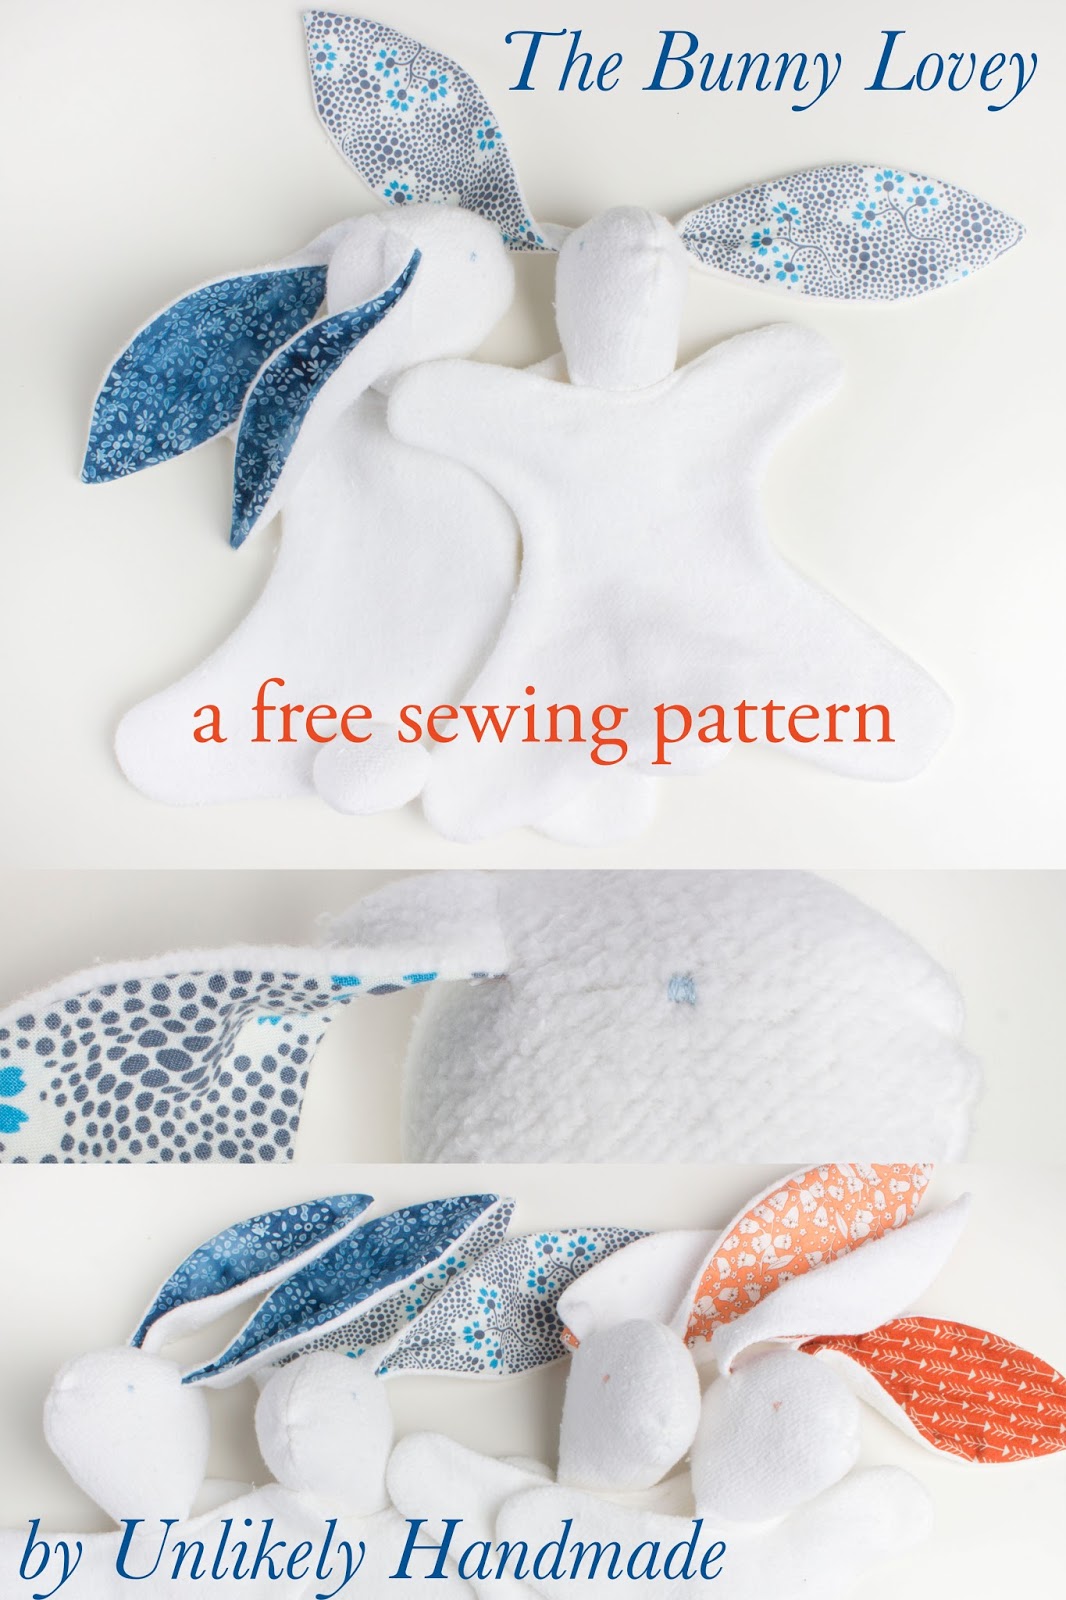 The Bunny Lovey: A Free Sewing Pattern with Illustrated Instructions